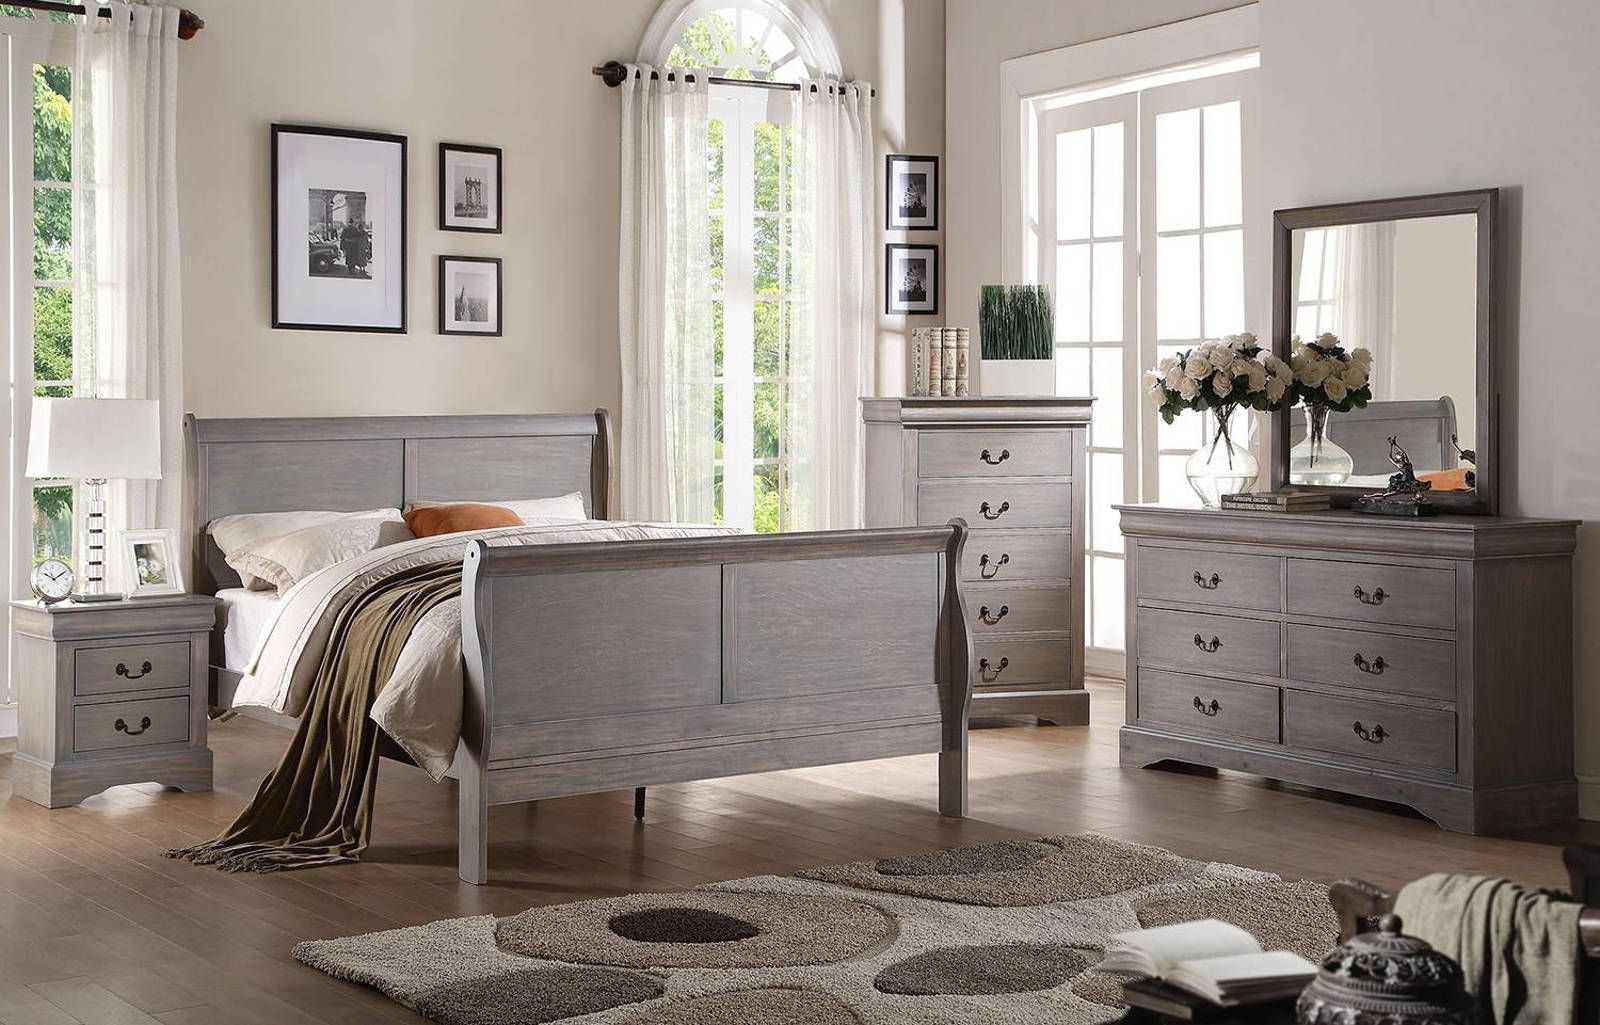 Liveasy Furniture 5-Piece Grey Finish Louis Philippe Furniture Queen Size  Bedroom Set. Bed, Dresser,…See more Liveasy Furniture 5-Piece Grey Finish